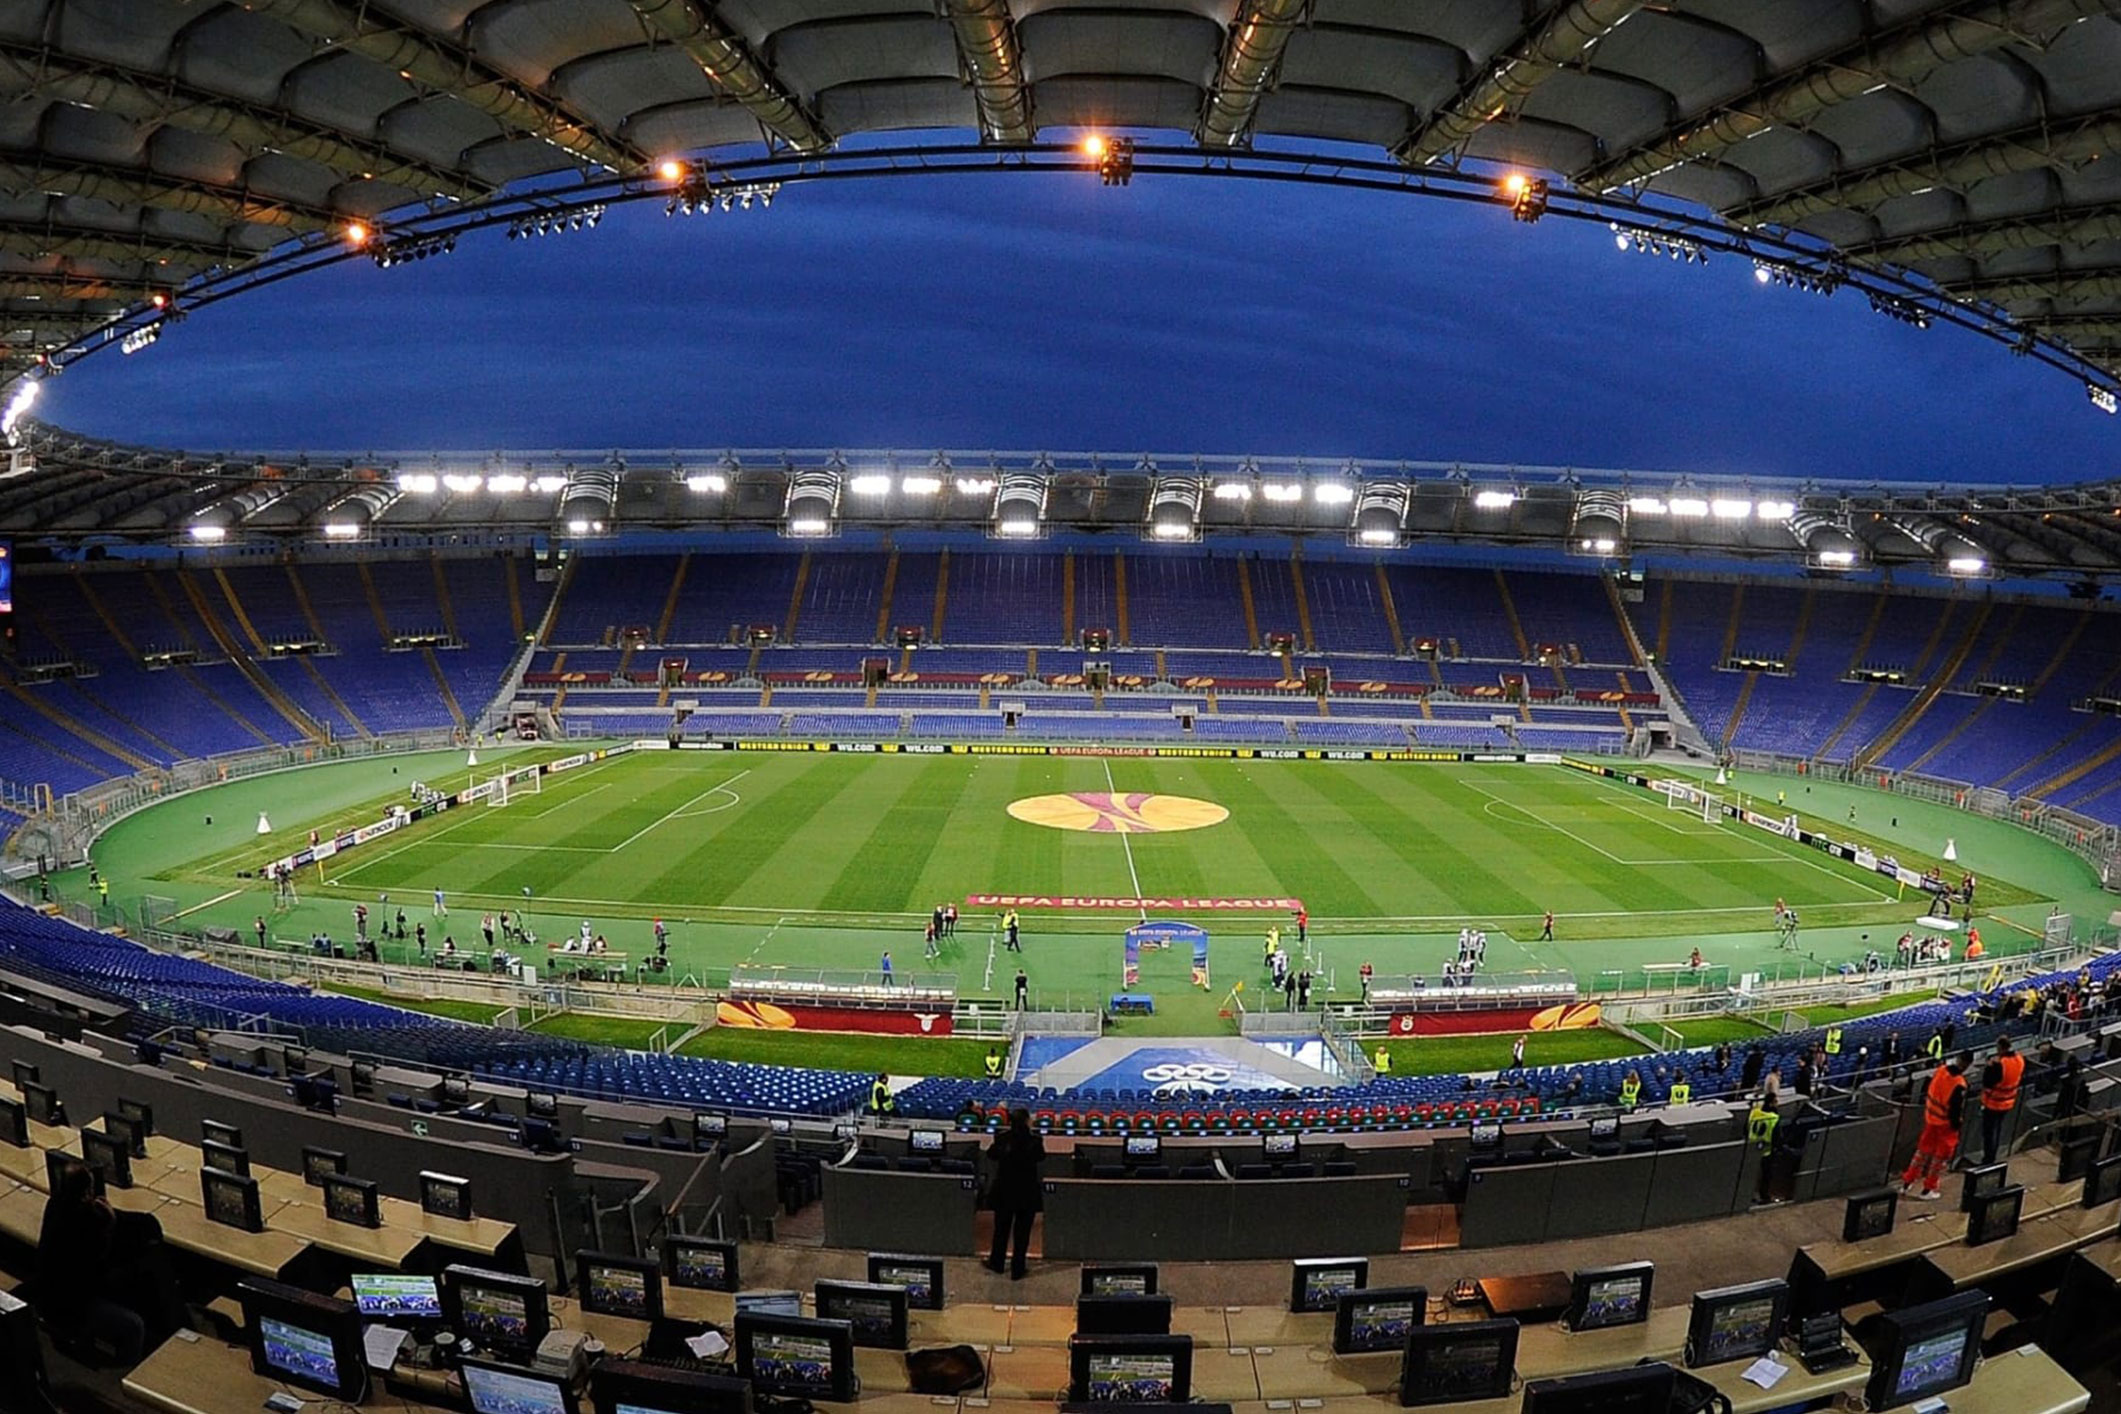 Flight restrictions made in Rome for UEFA Euro Cup 2021